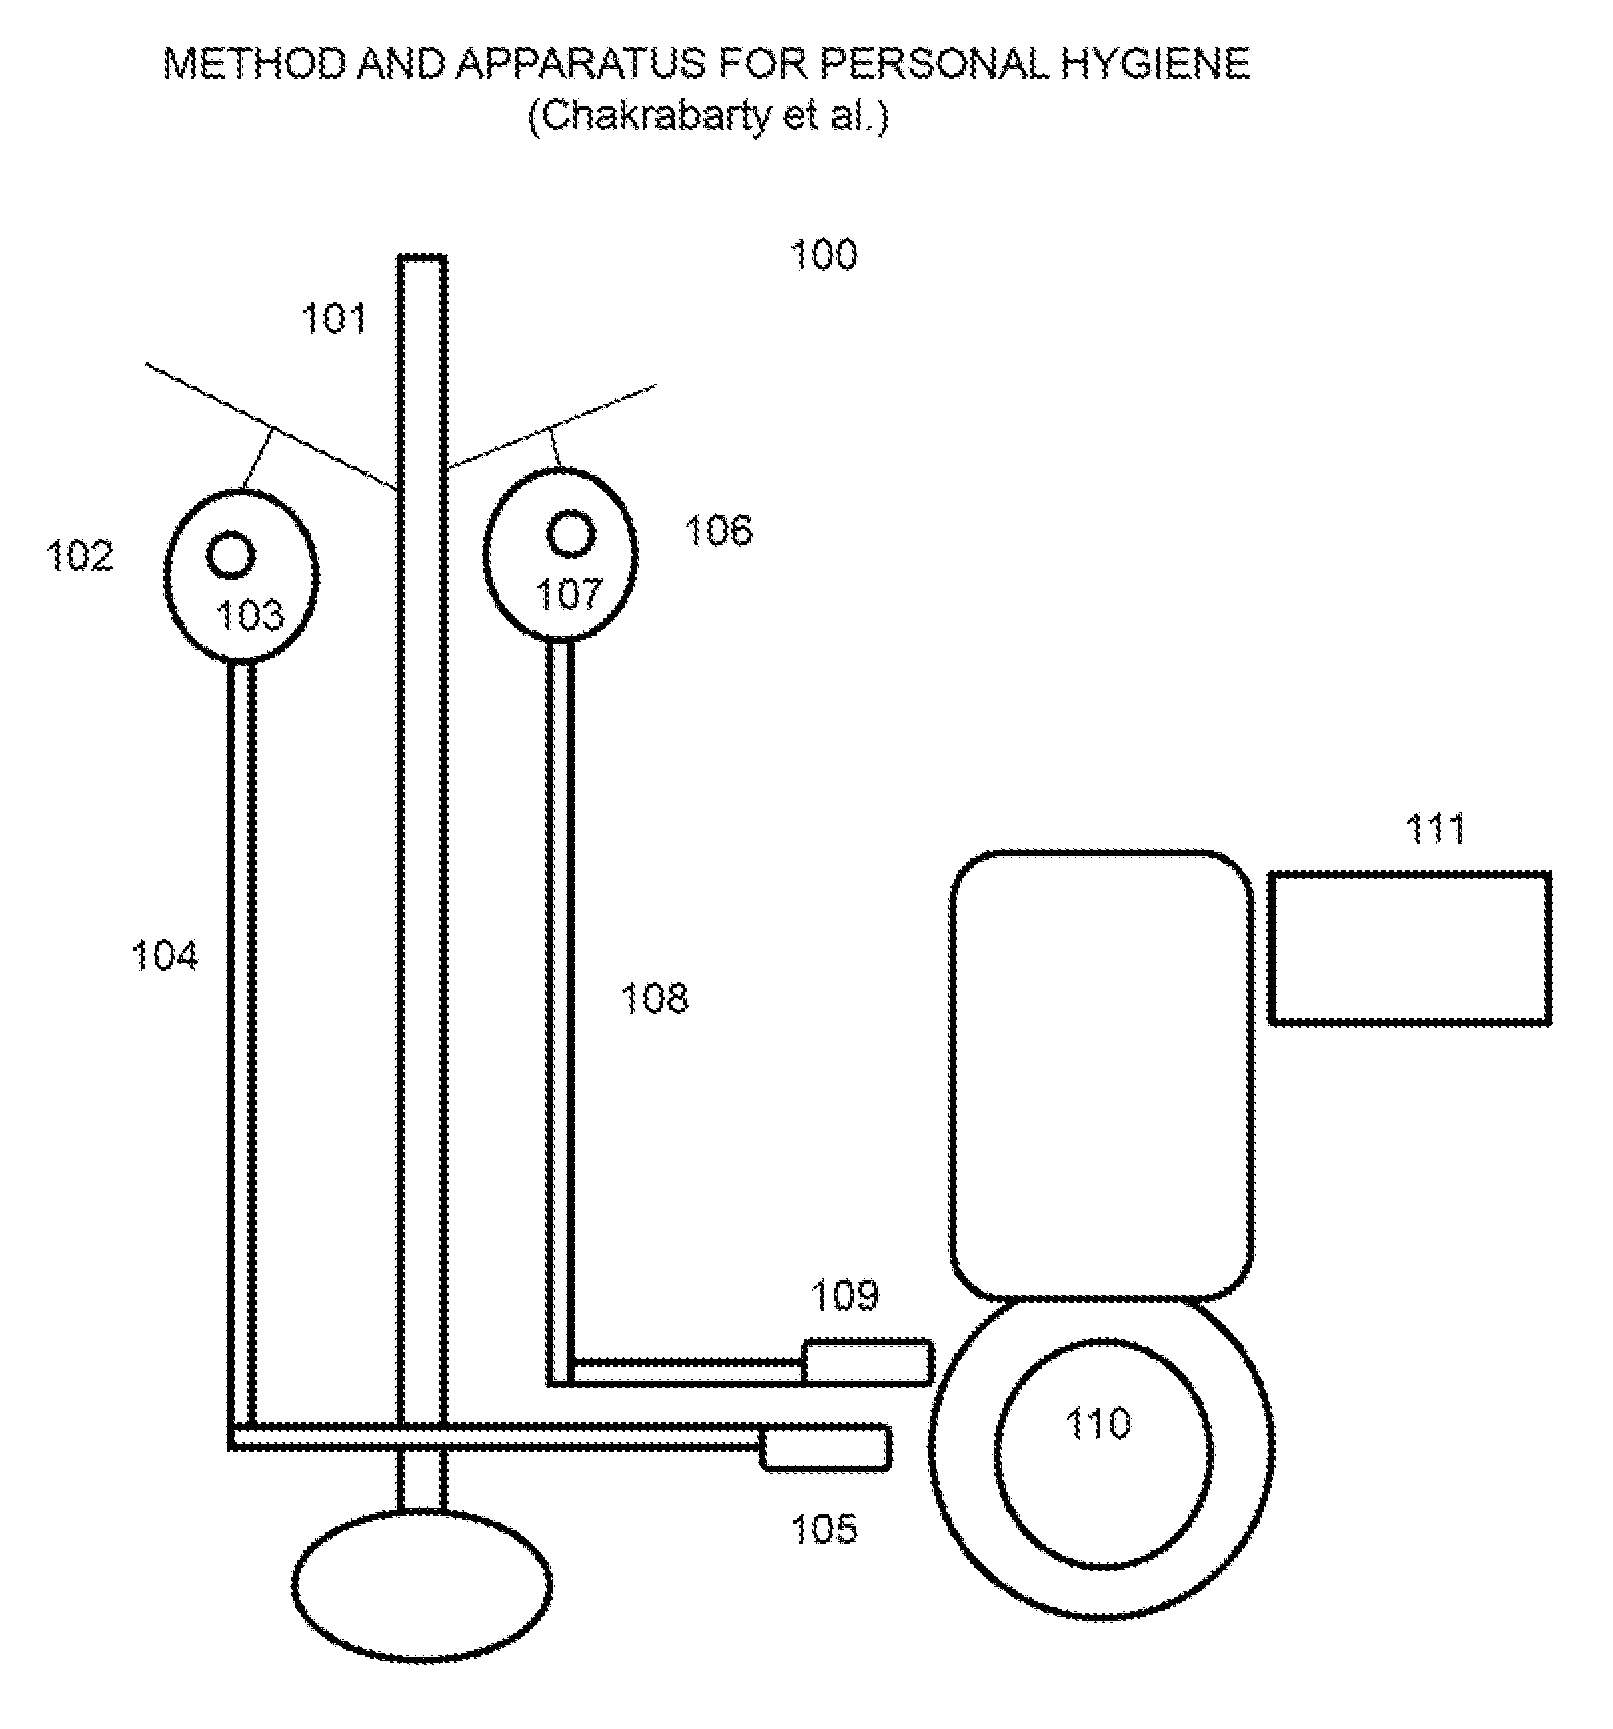 Method and apparatus for personal hygiene